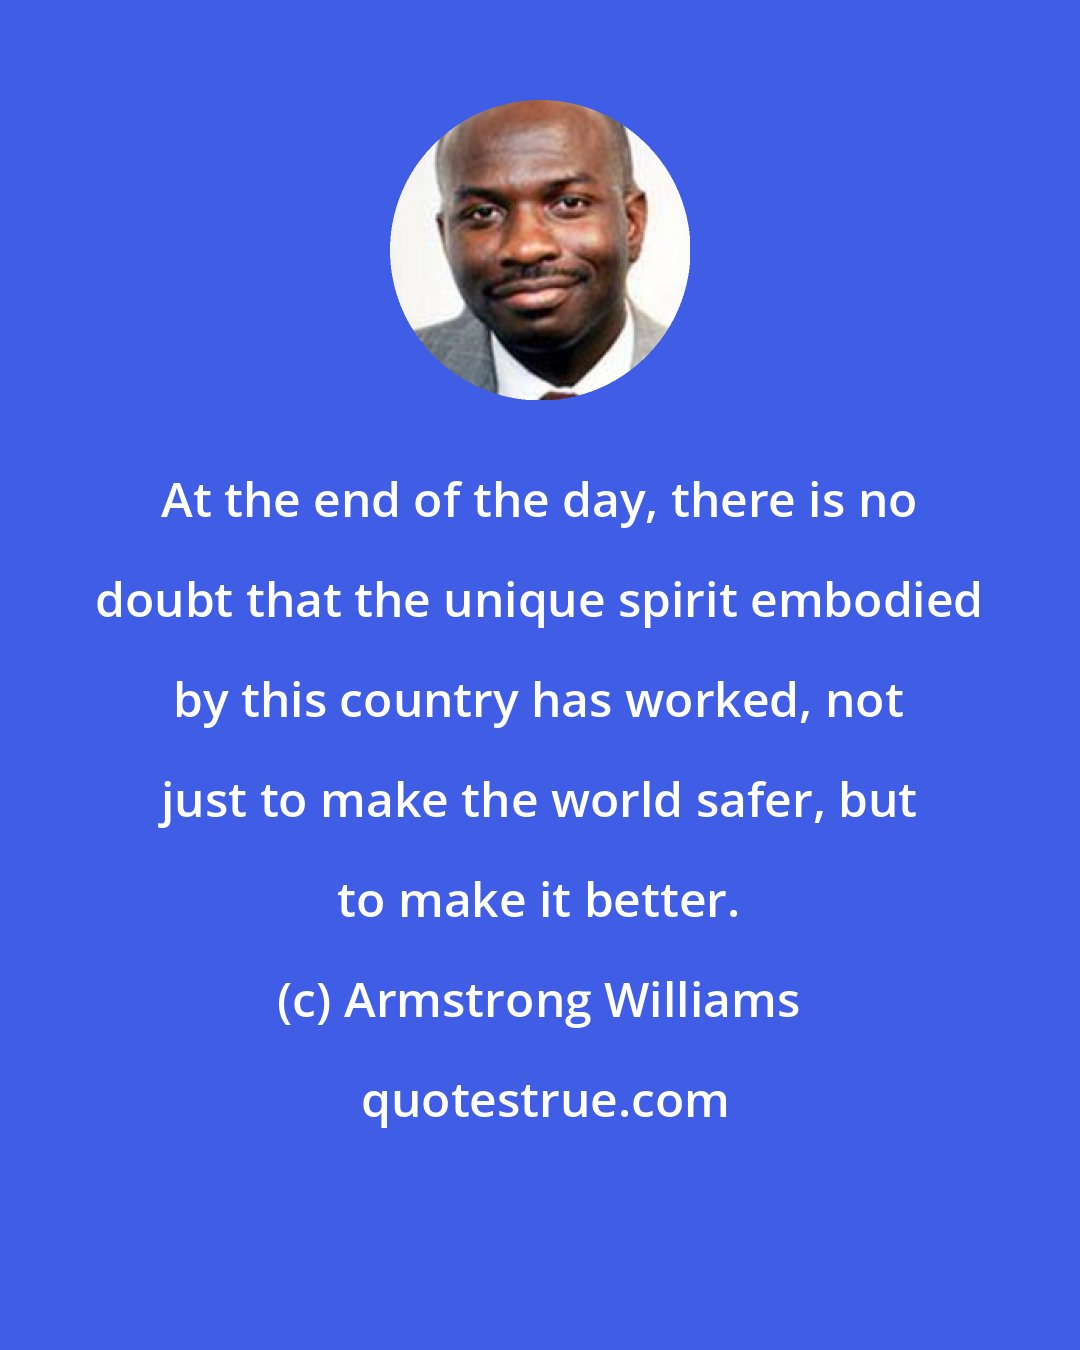 Armstrong Williams: At the end of the day, there is no doubt that the unique spirit embodied by this country has worked, not just to make the world safer, but to make it better.